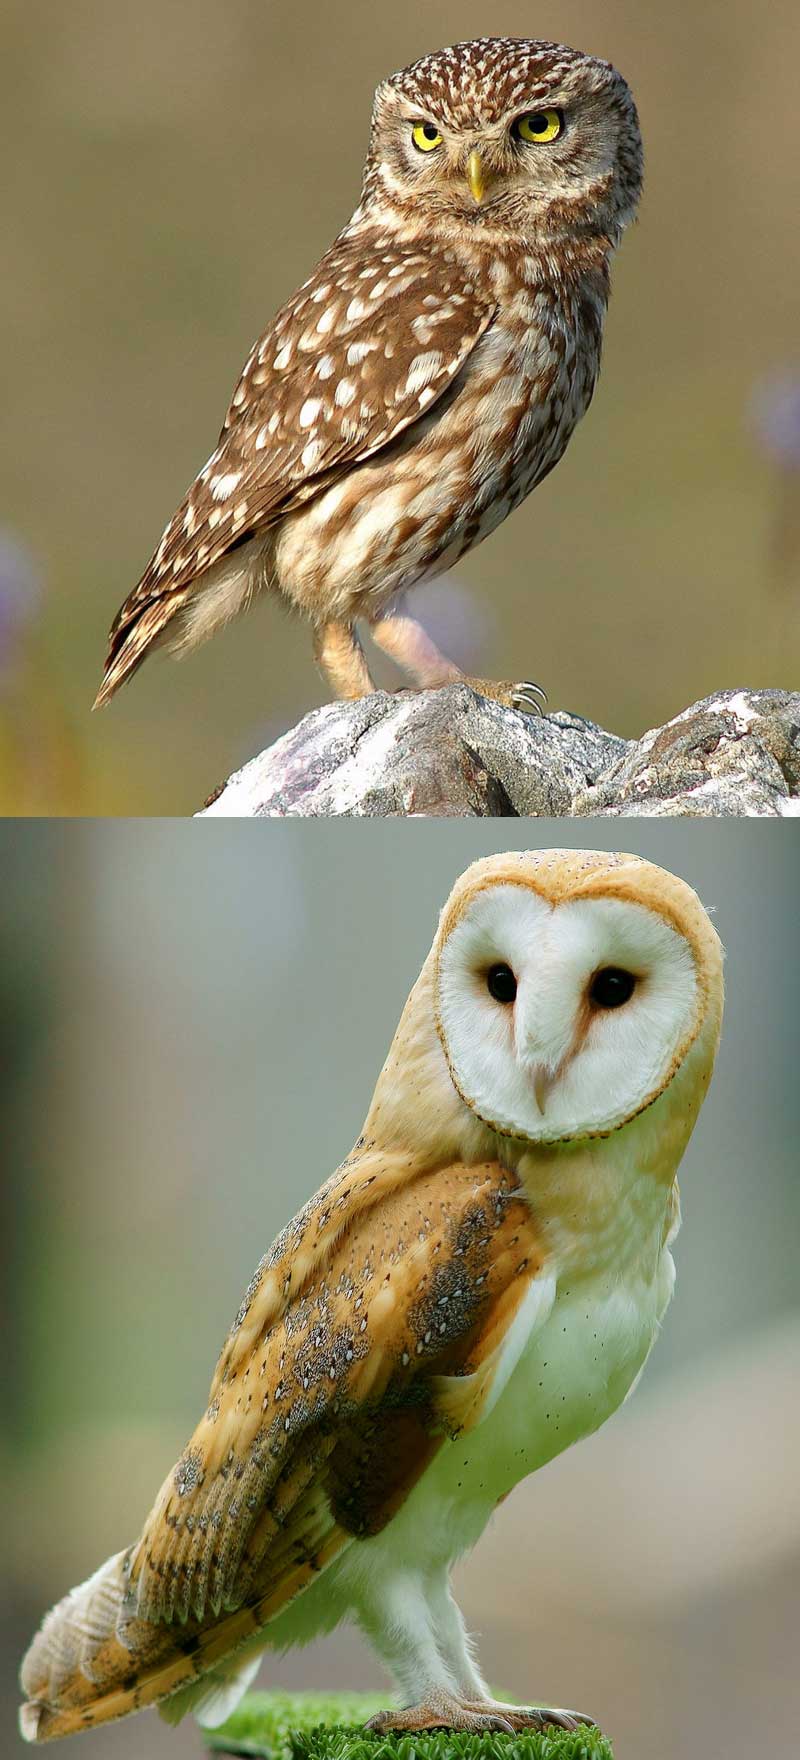 Fact: There are 2 owl families and 200 owl species in the world